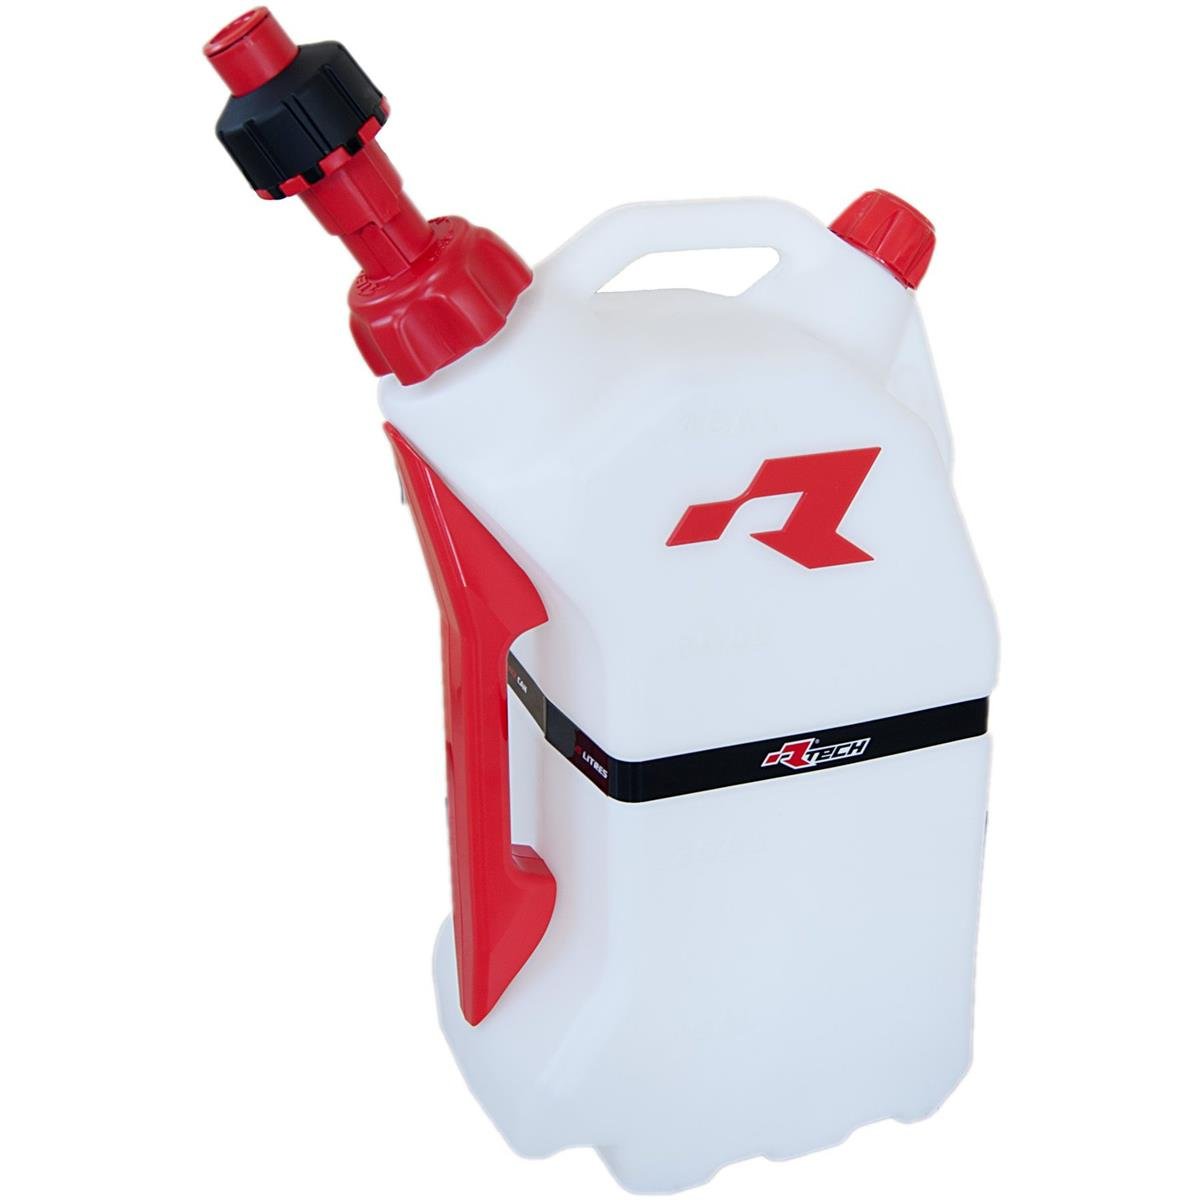 RTECH Gas Can R15 with Quick Tank System, 15 L, Red